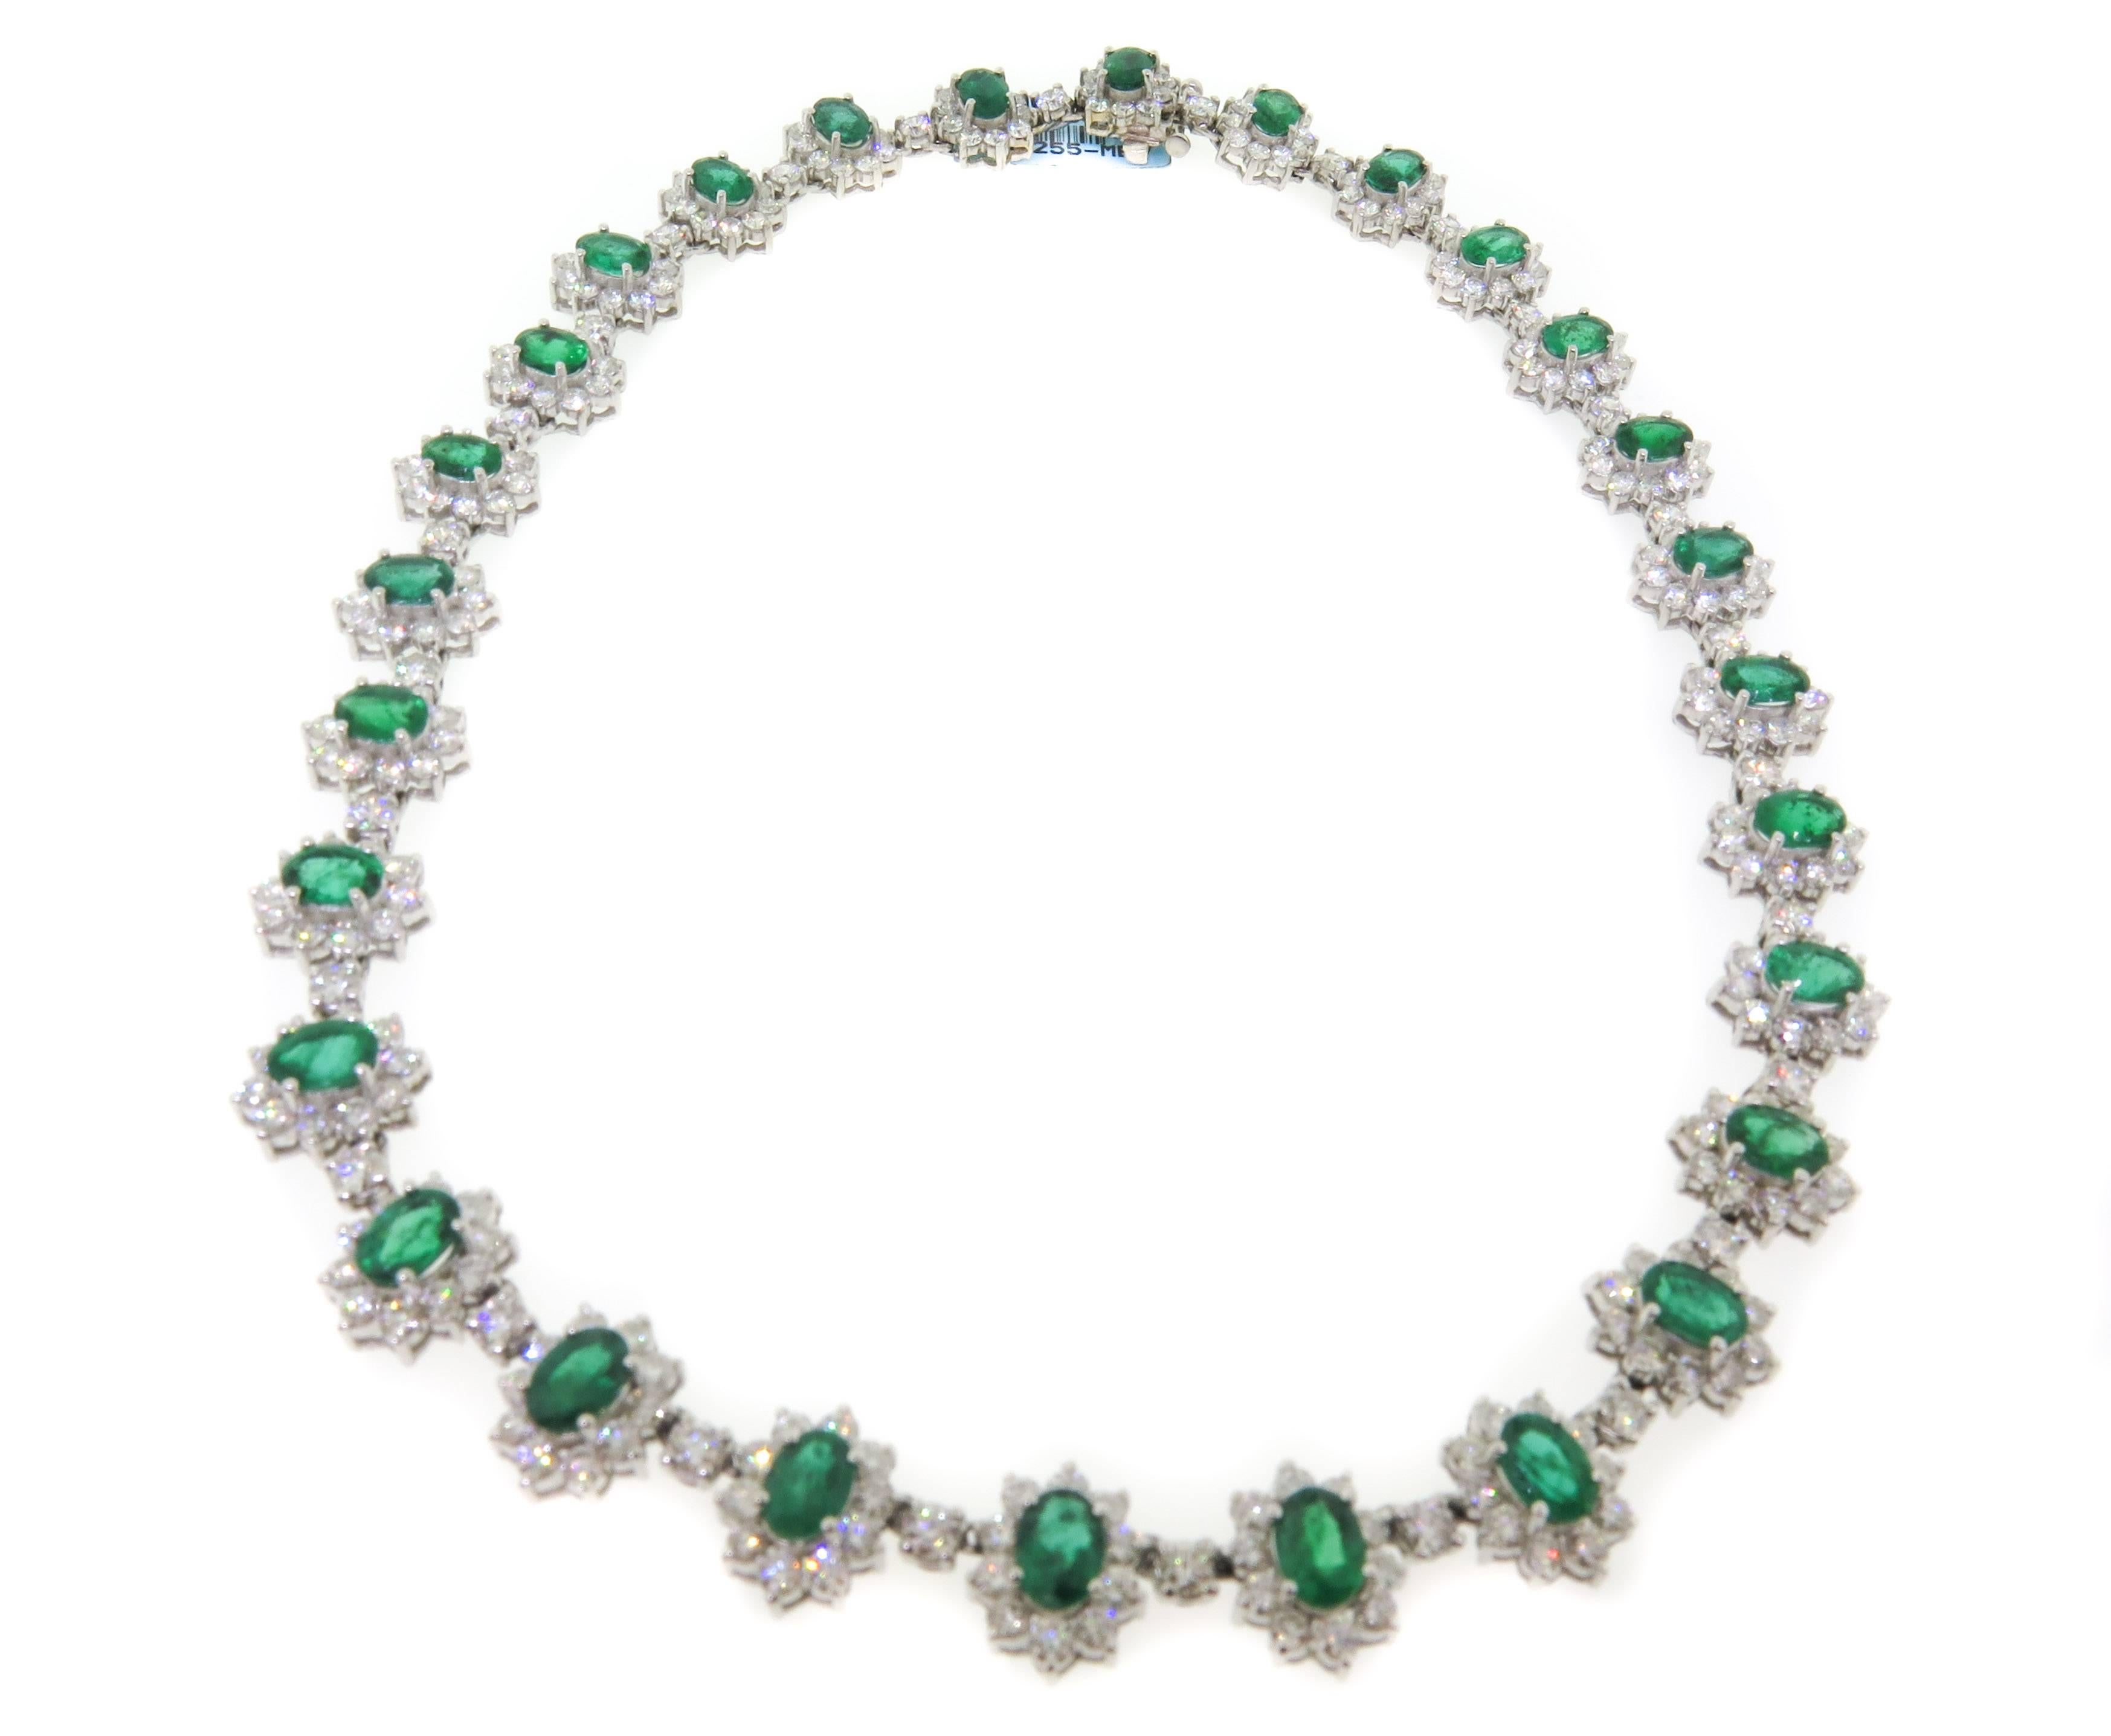 A simply stunning emerald and diamond necklace. This magnificent treasure, handcrafted in white gold and features 28 bright green oval shape emeralds which total approximately 20.47 carats, and round cut diamonds totaling 20.74 carats. A truly